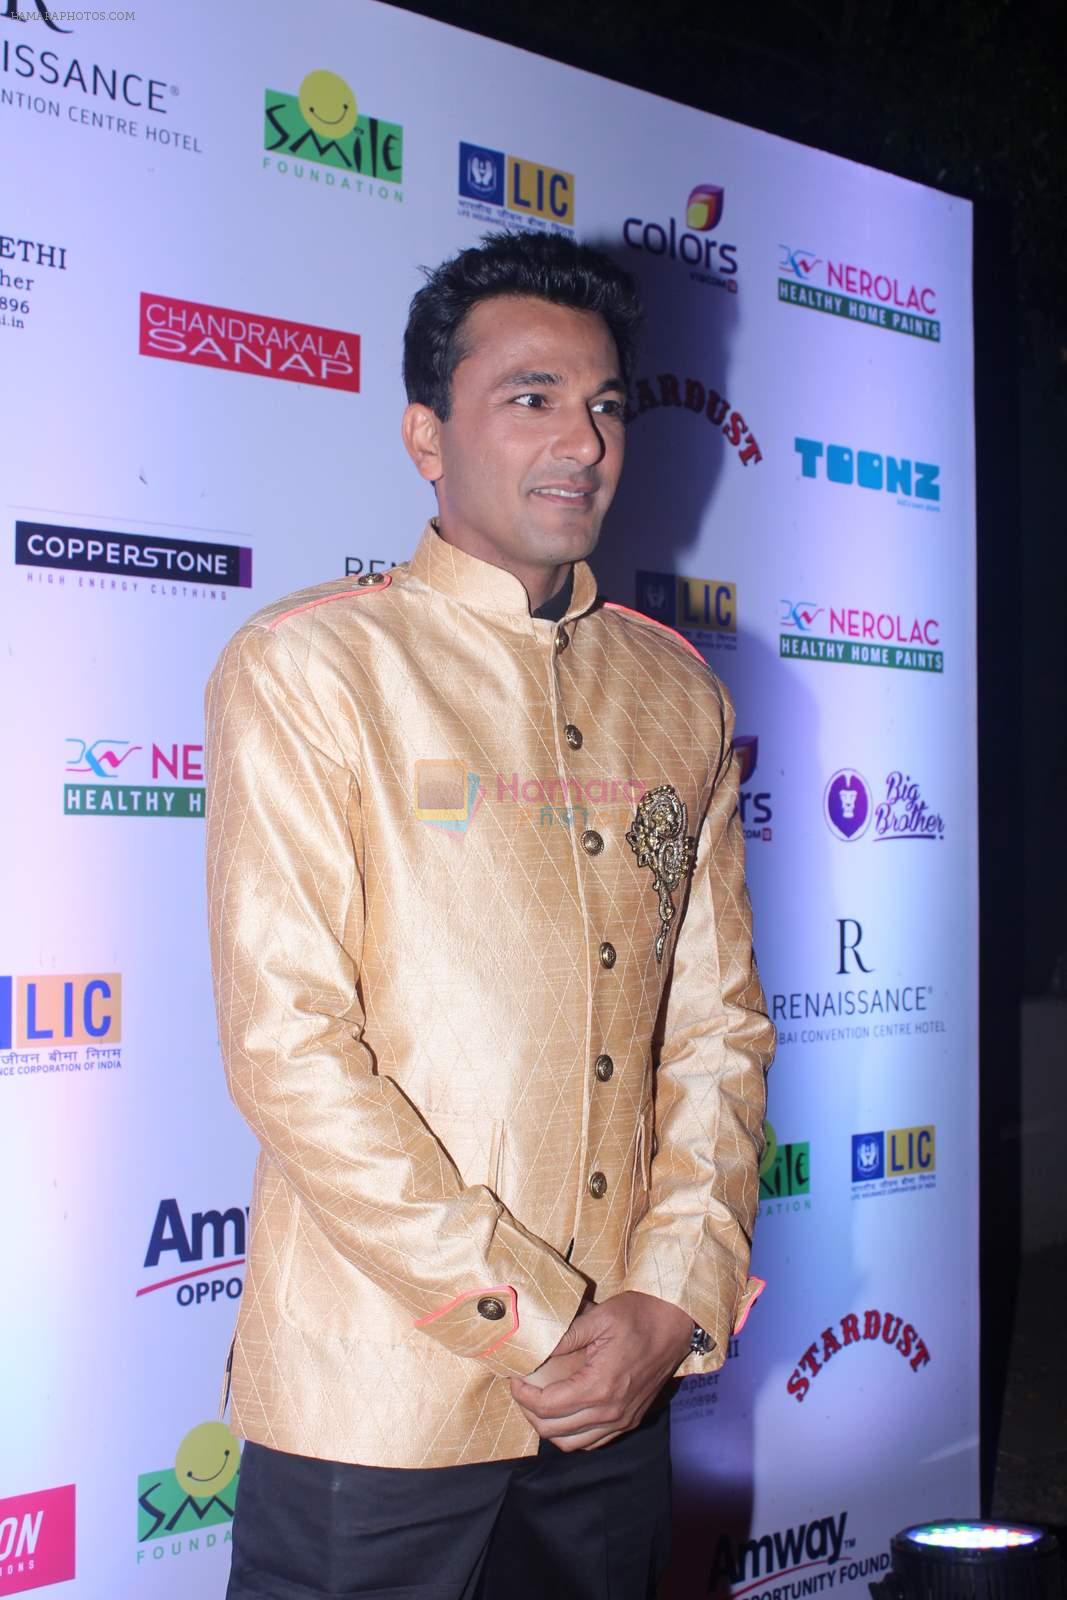 Vikas Khanna at Smile Foundation show with True Fitt & Hill styling in Rennaisance on 15th March 2015